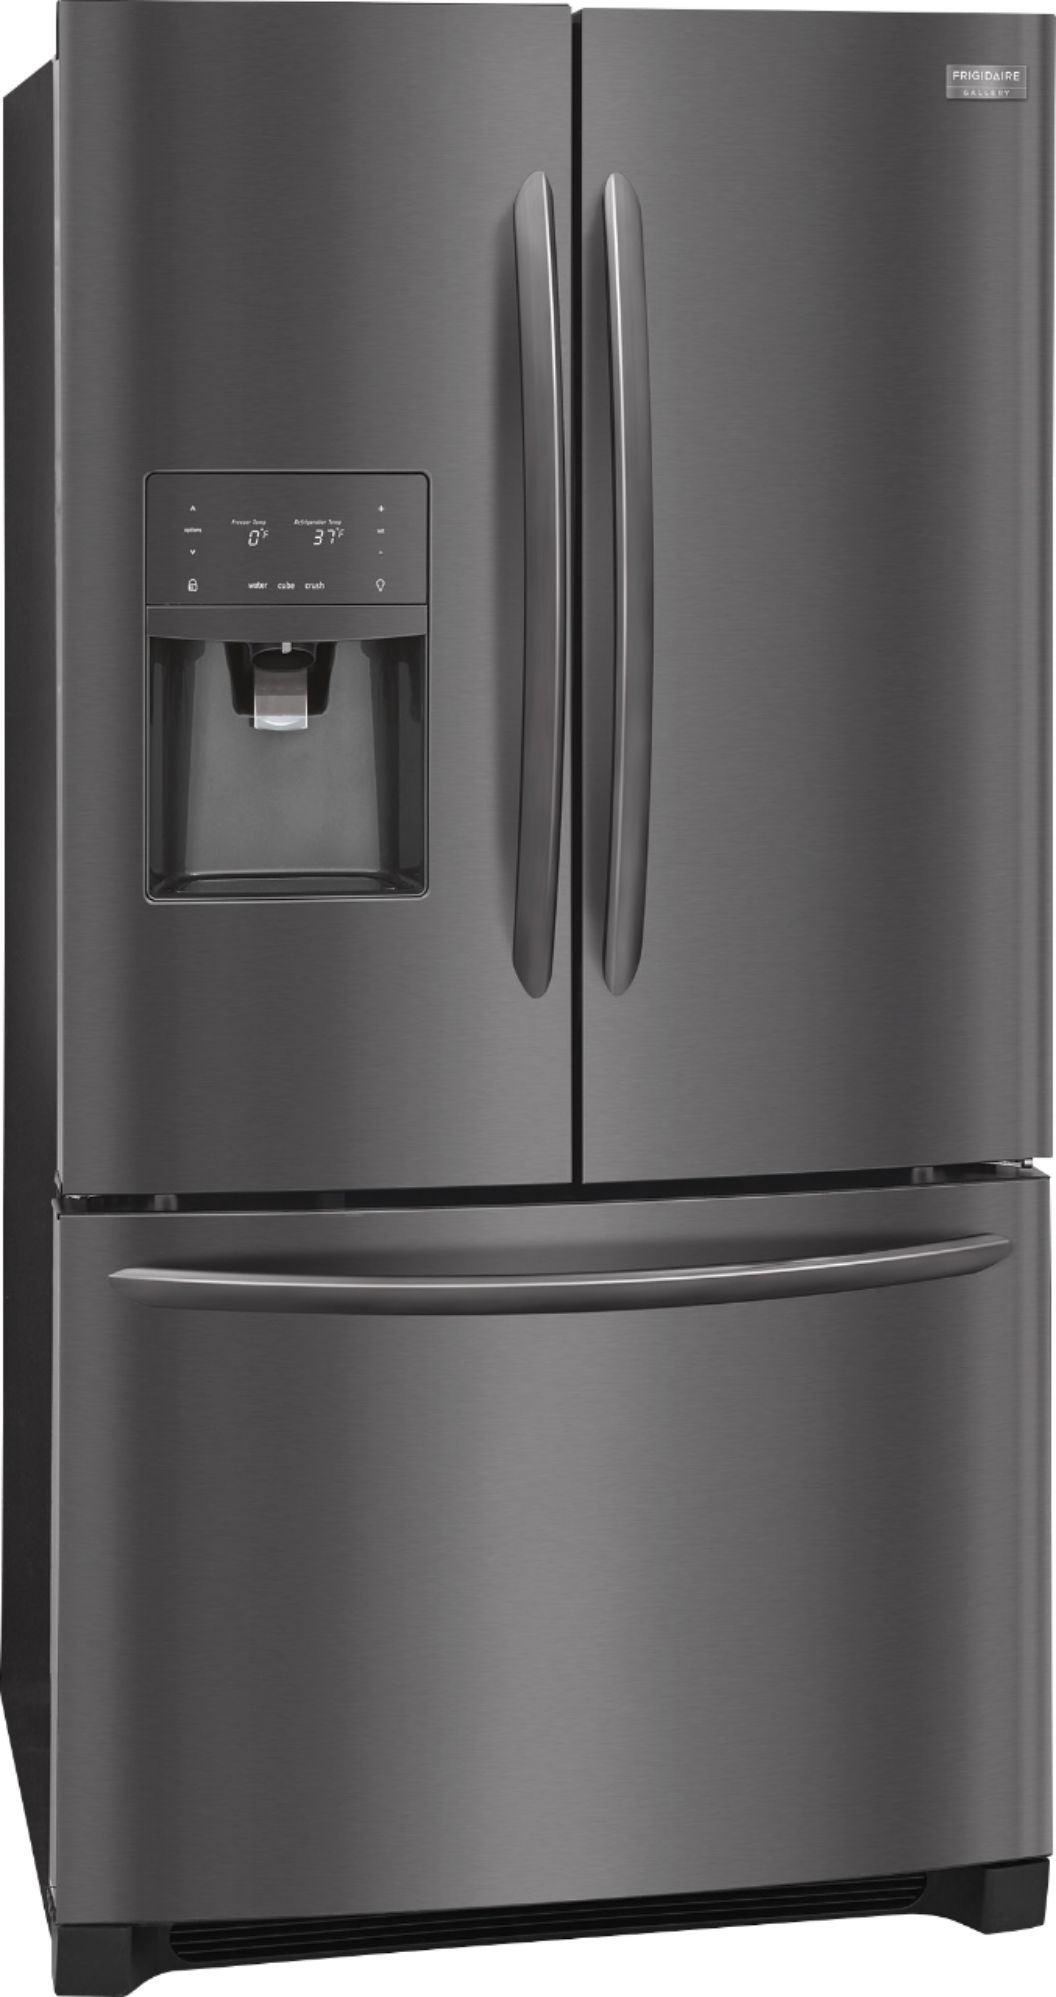 Angle View: Frigidaire - Gallery 21.7 Cu. Ft. French Door Refrigerator - Black Stainless Steel